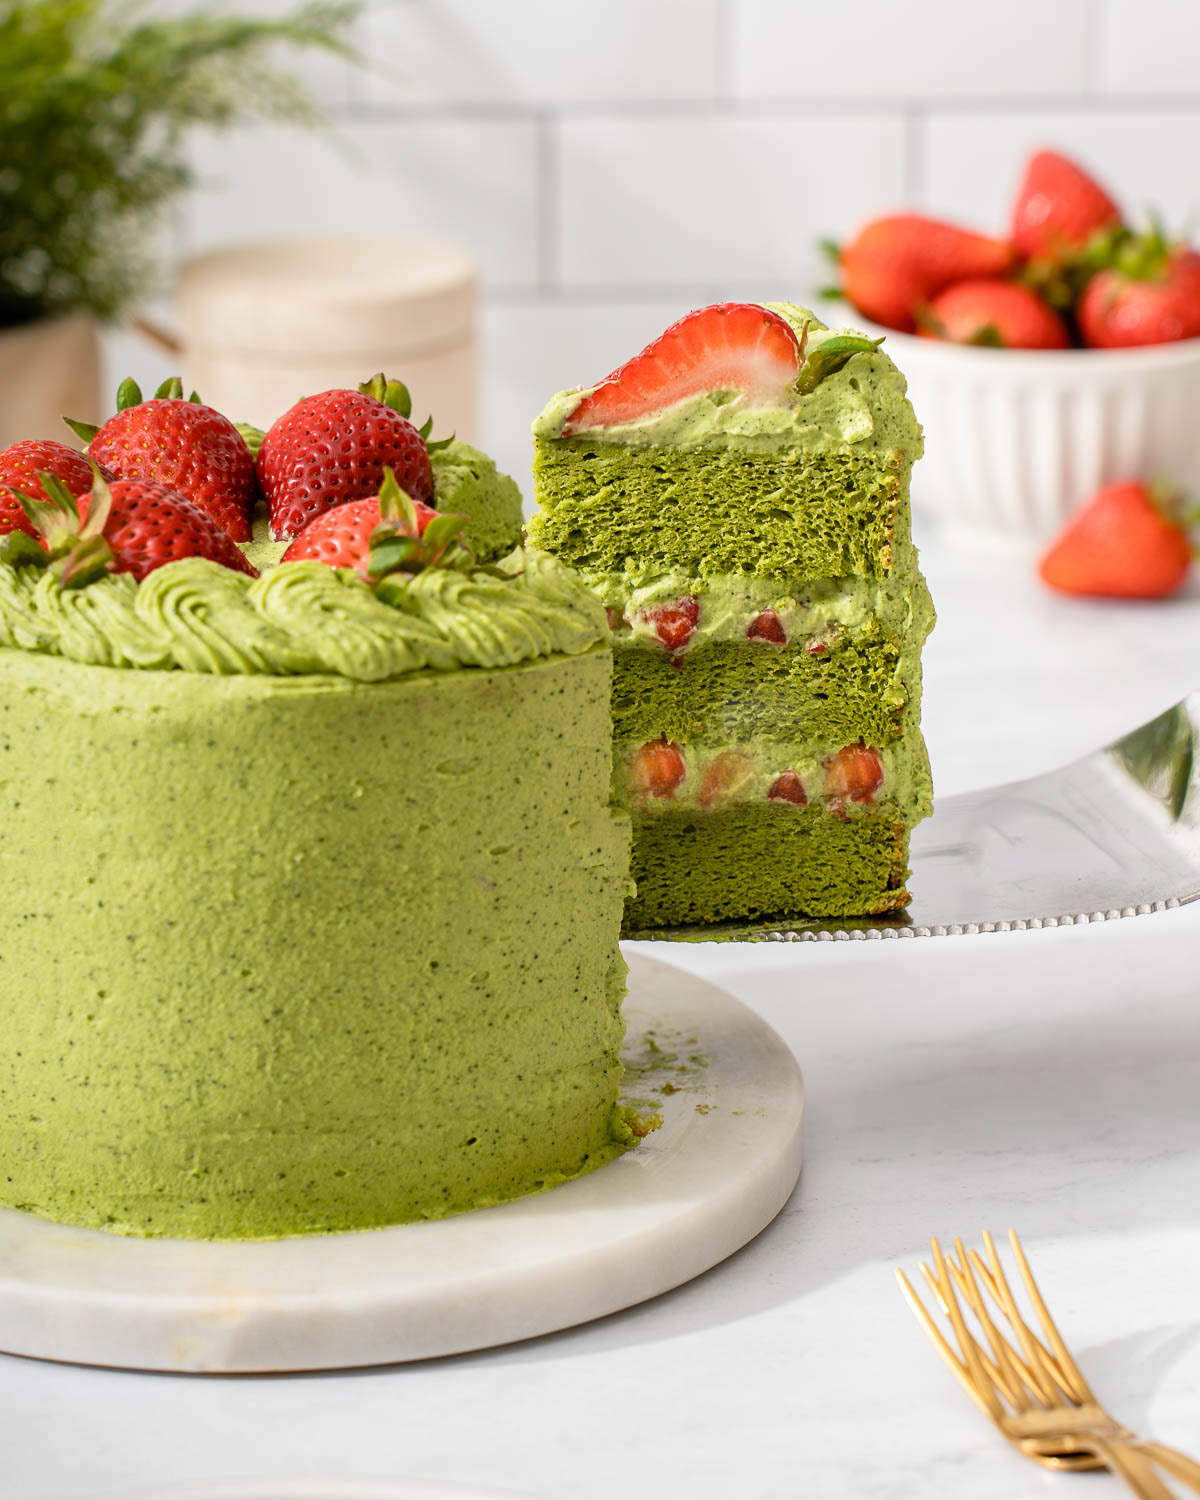 Someone lifting out a slice of matcha cake from a whole cake.